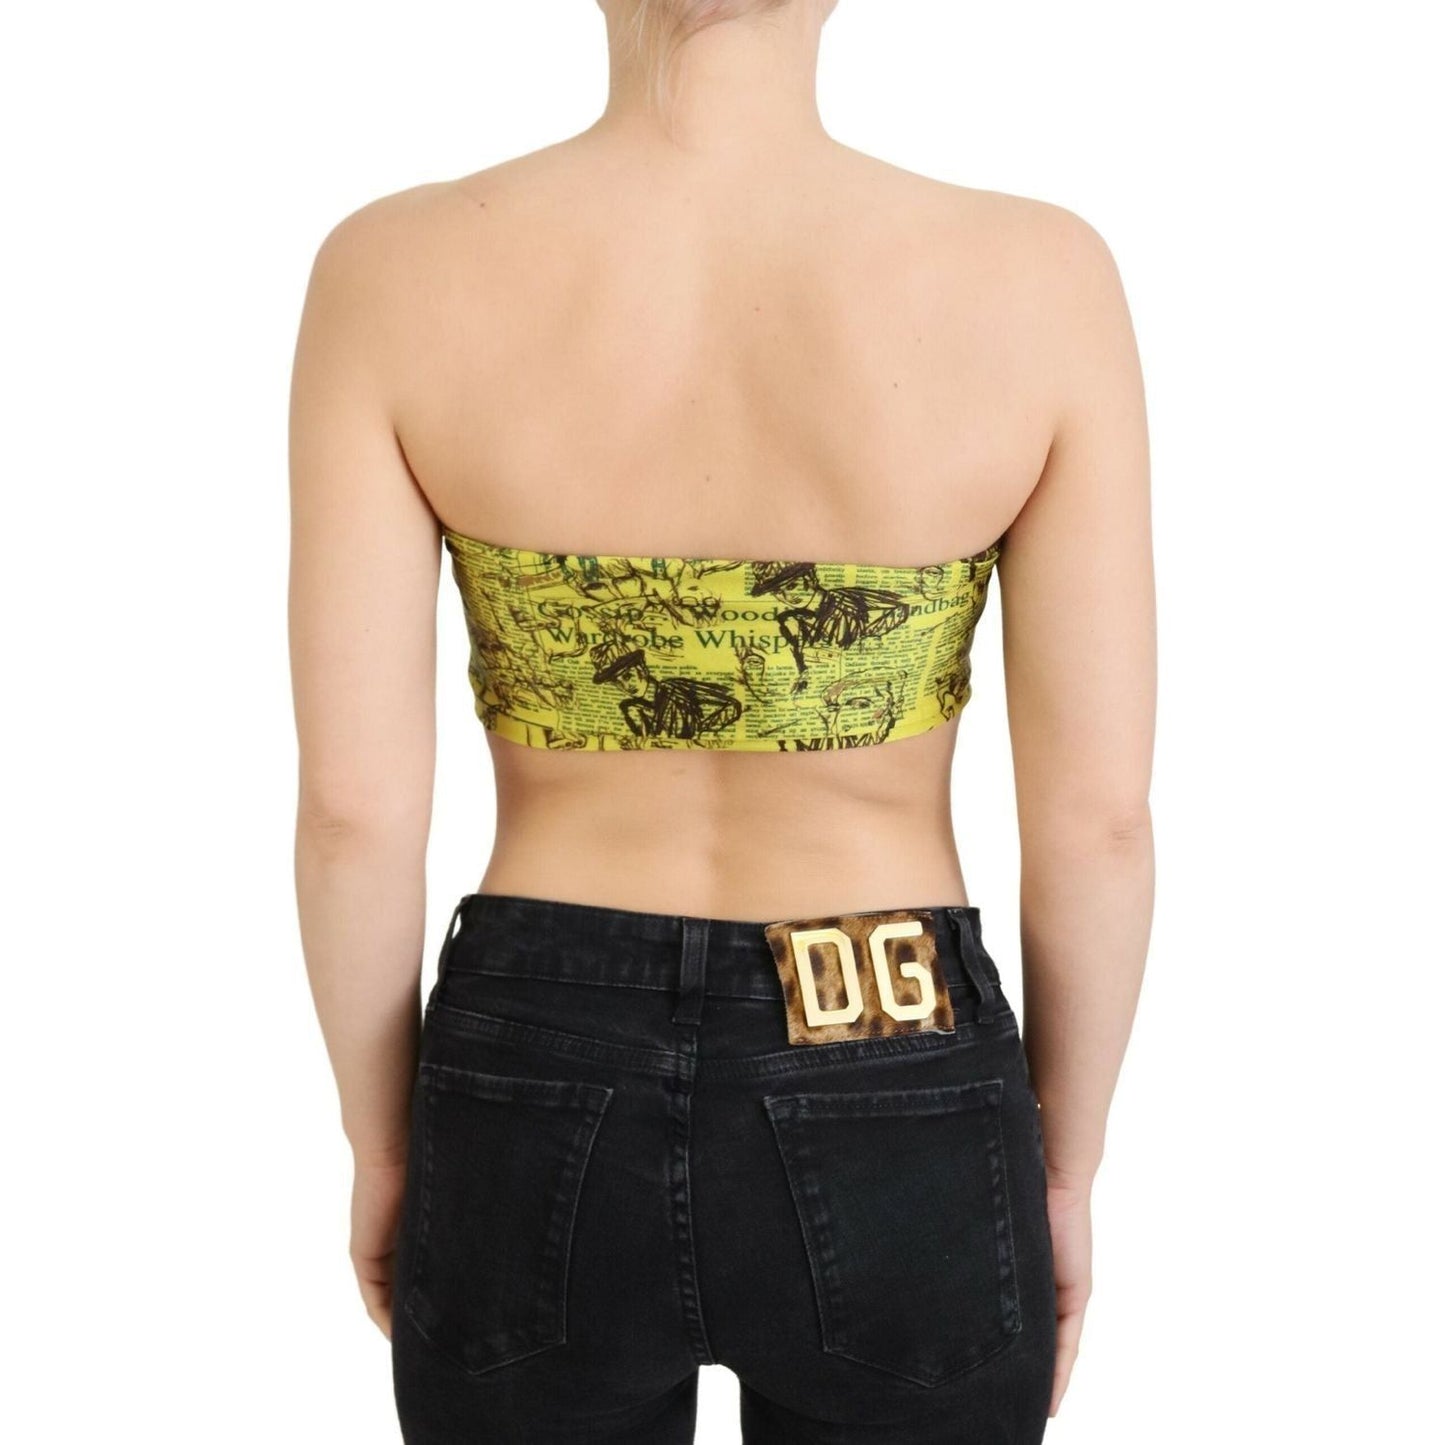 John Galliano Chic Cropped Stretch Top Bra in Multicolor Print yellow-newspaper-print-cropped-blouse